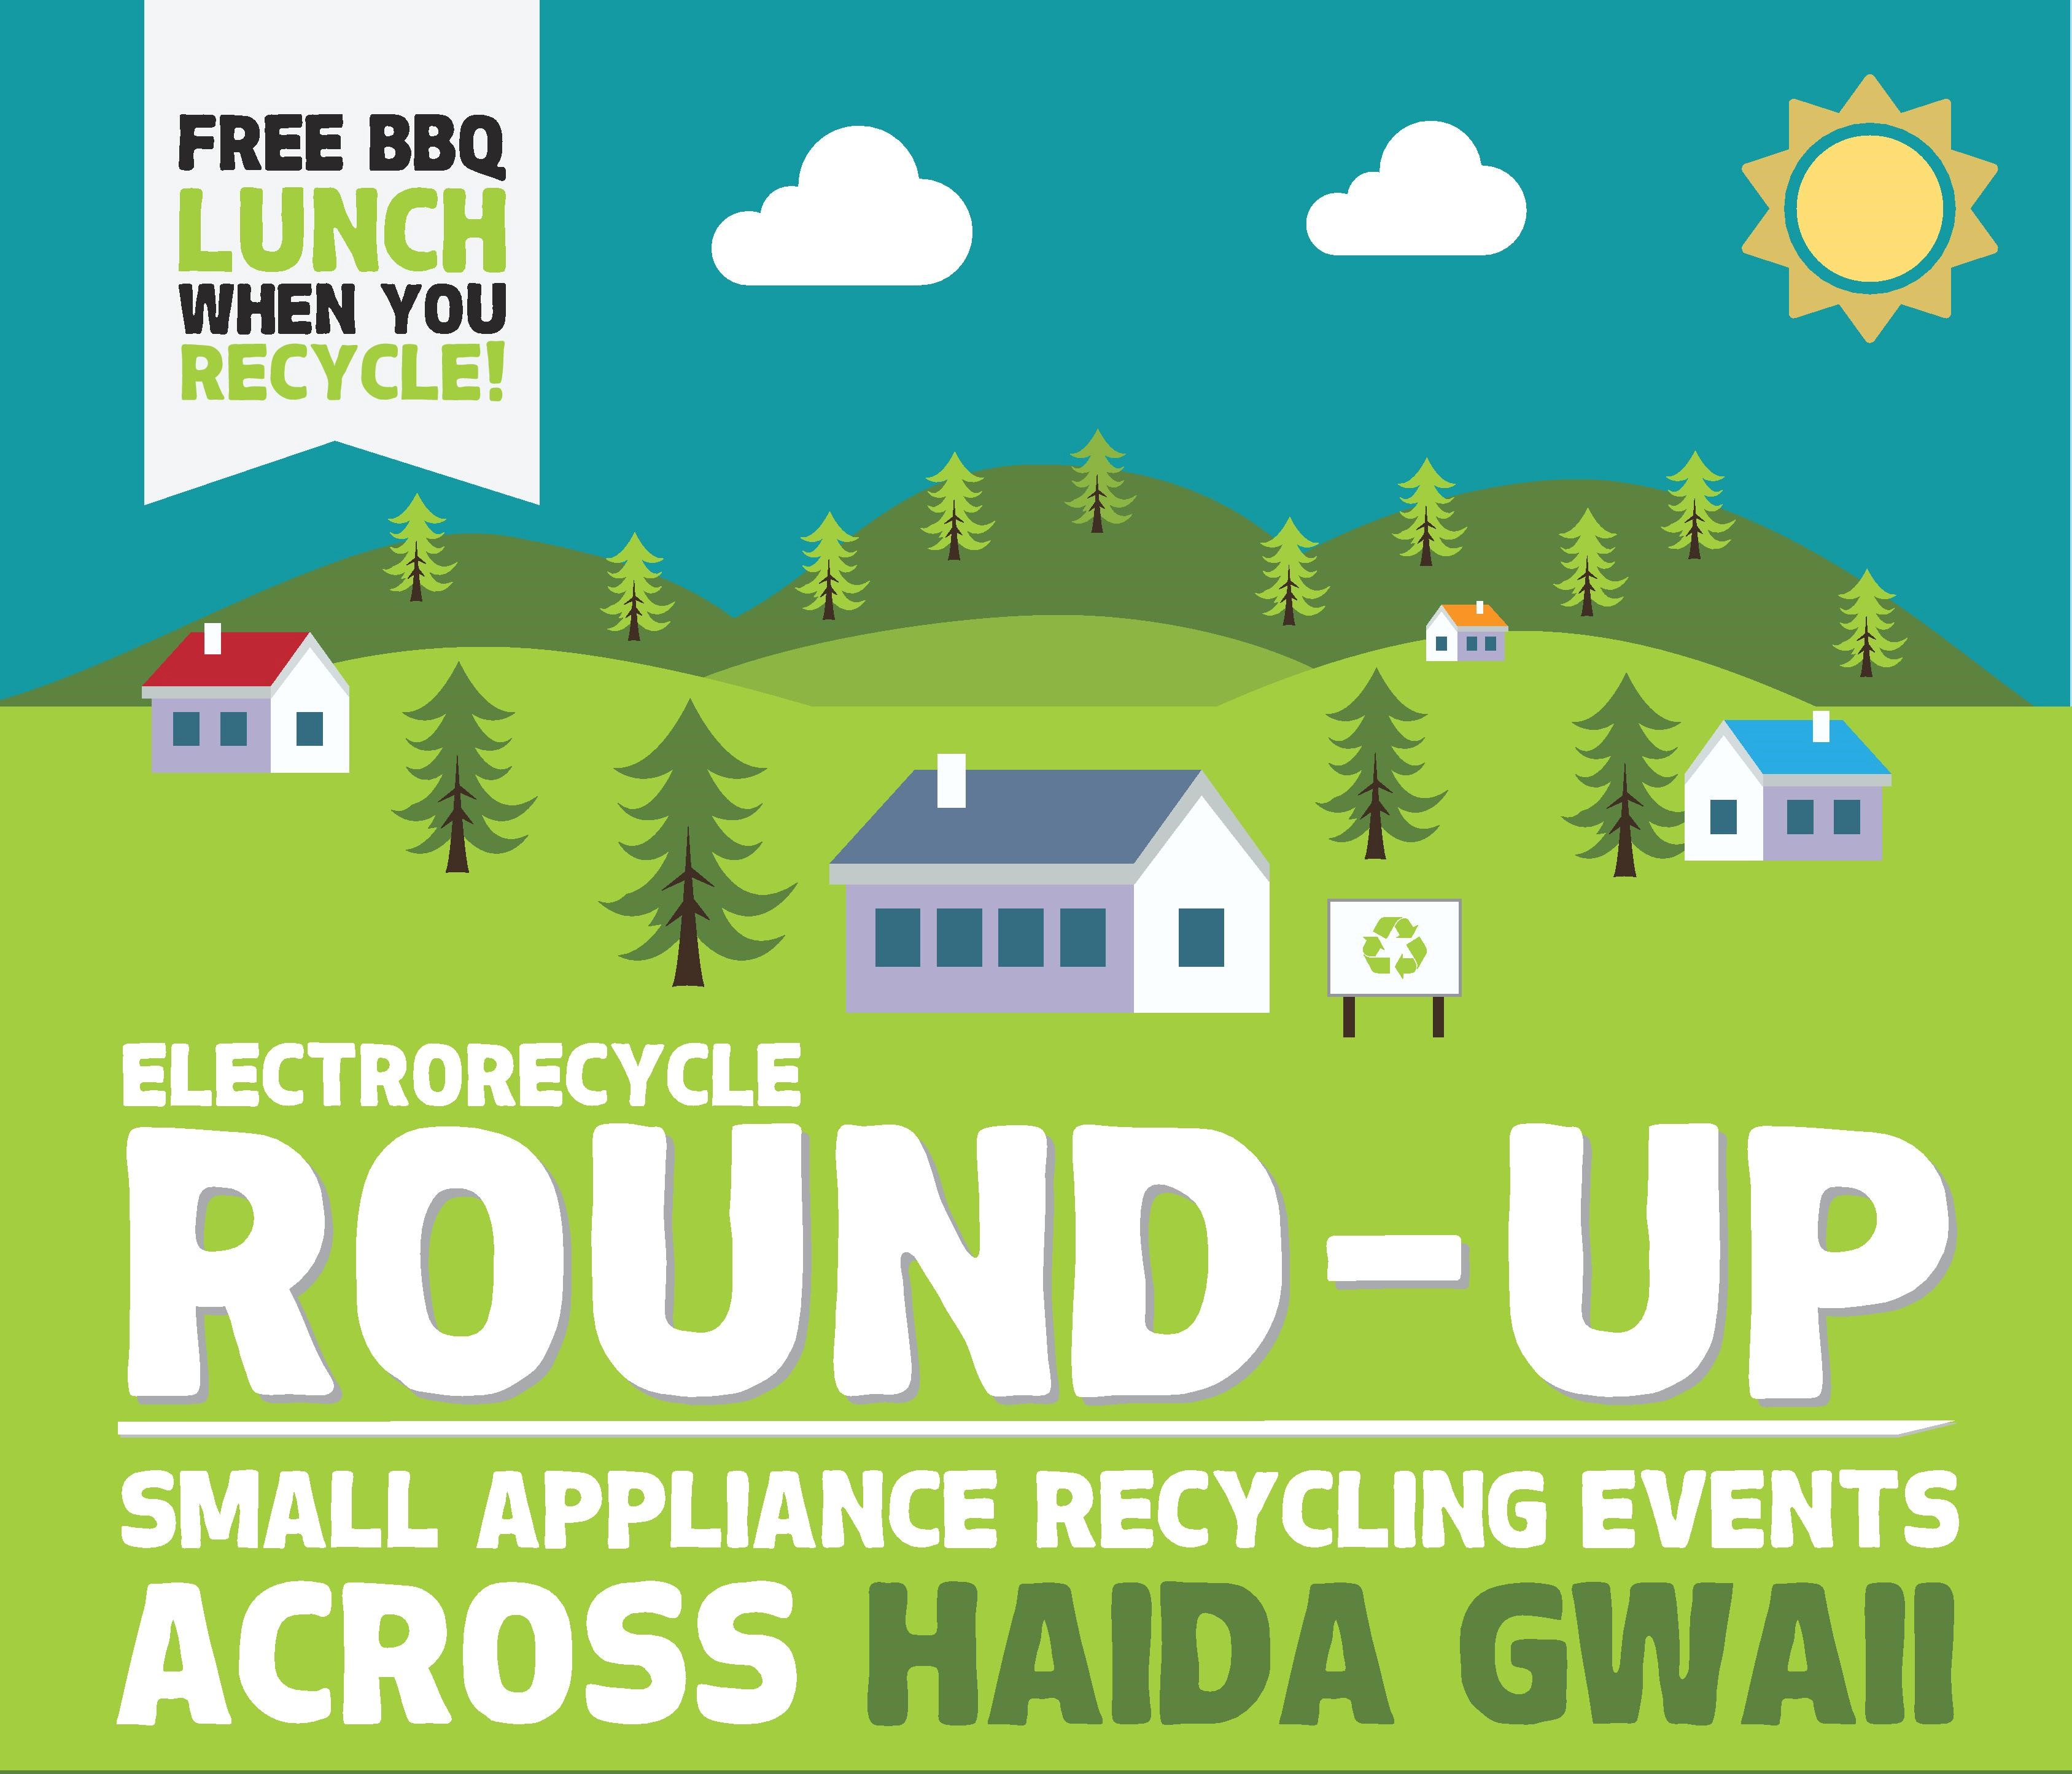 ElectroRecycle Round-up and BBQ - Port Clements